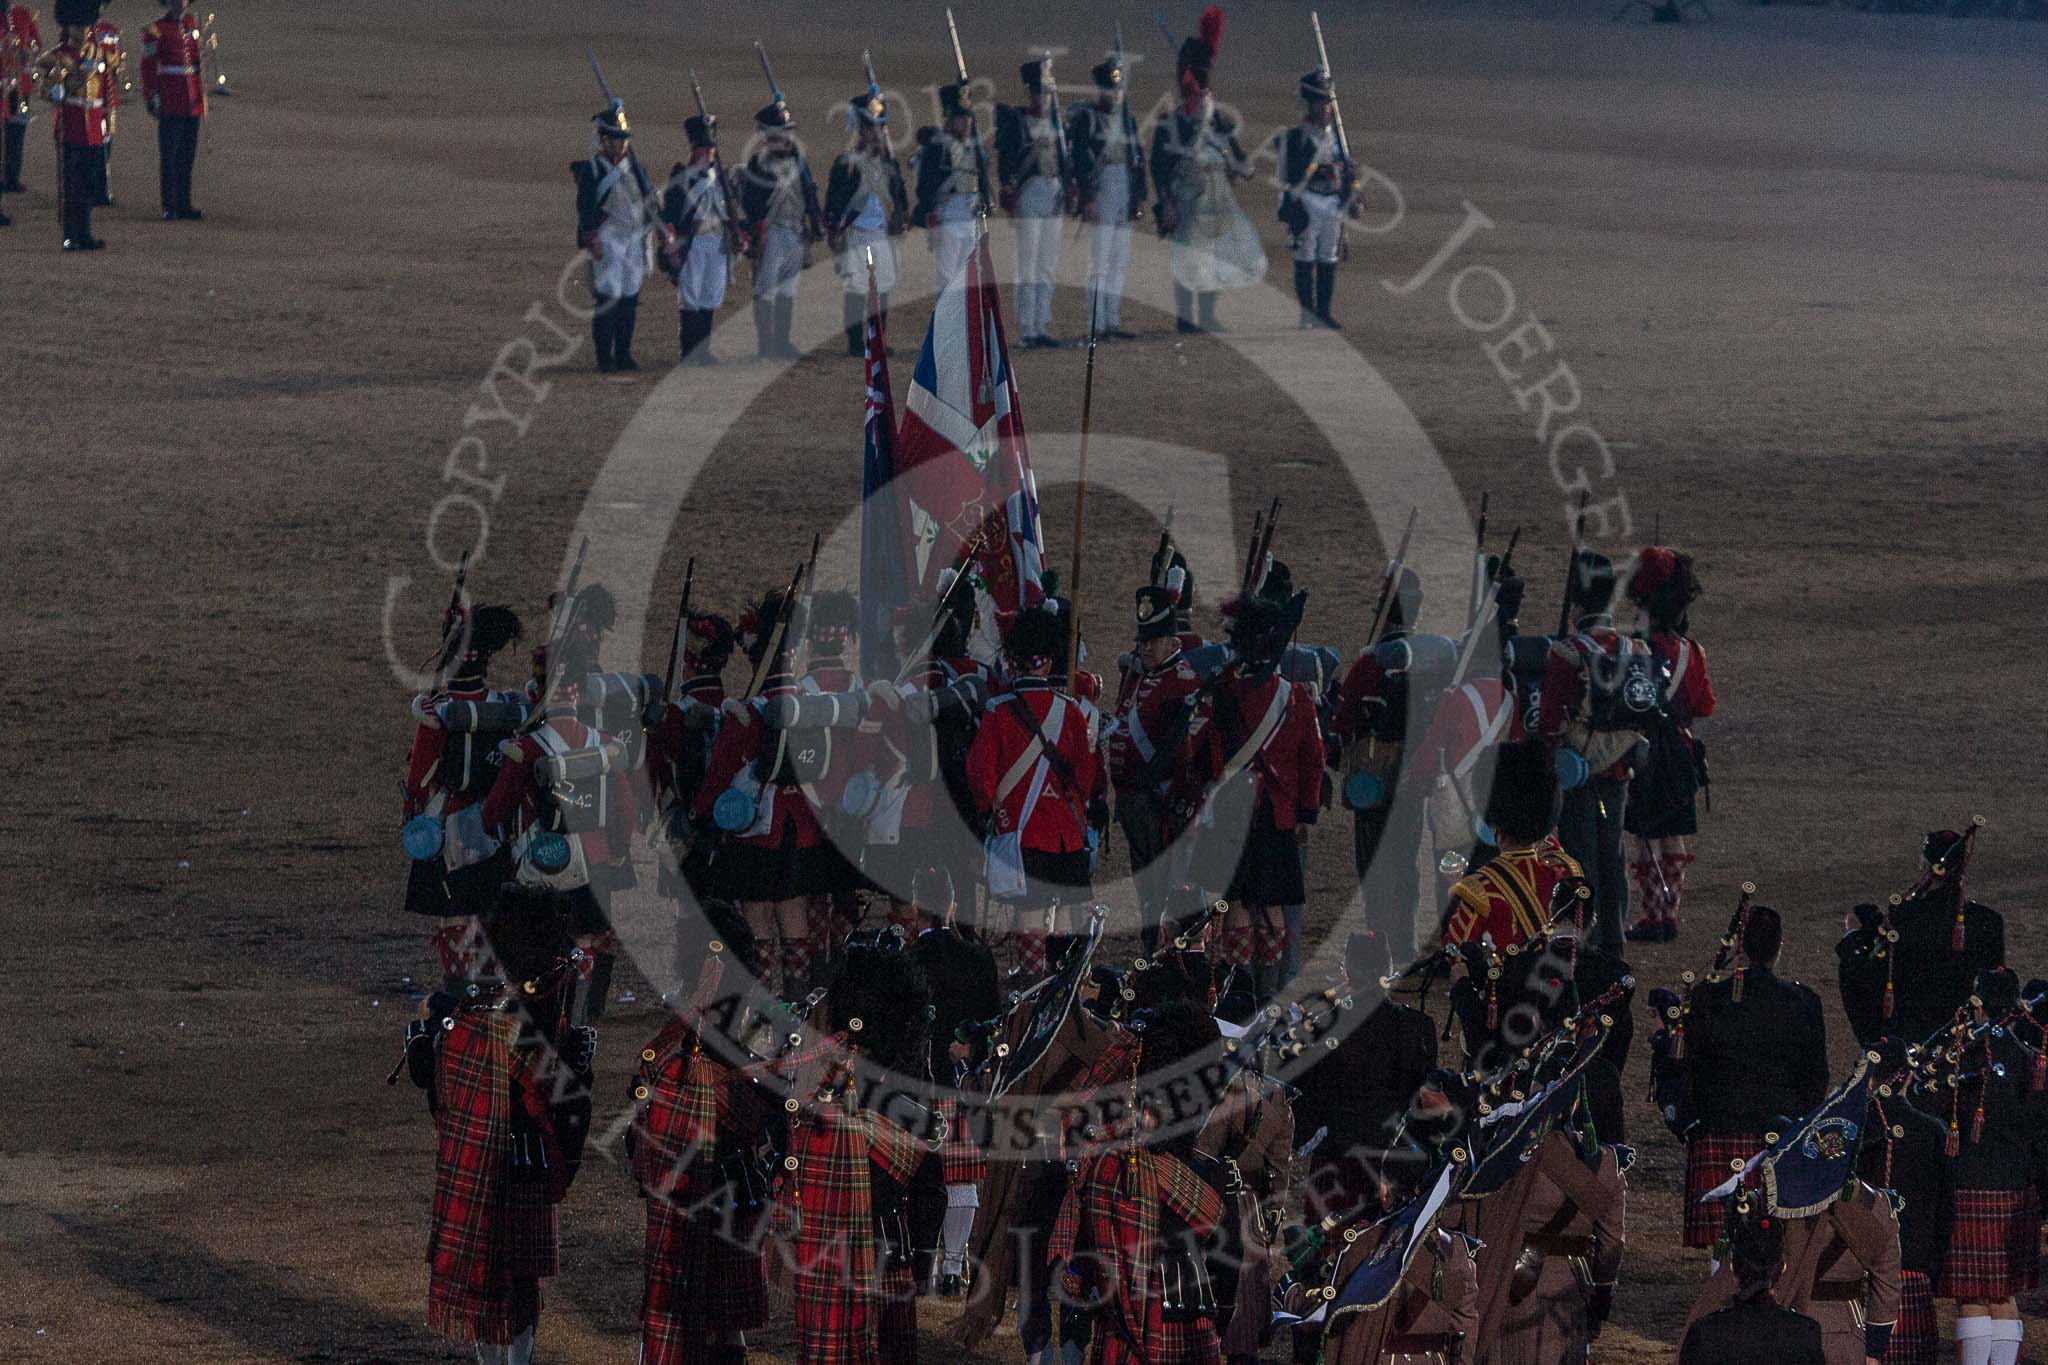 Beating Retreat 2015 - Waterloo 200.
Horse Guards Parade, Westminster,
London,

United Kingdom,
on 10 June 2015 at 21:28, image #354